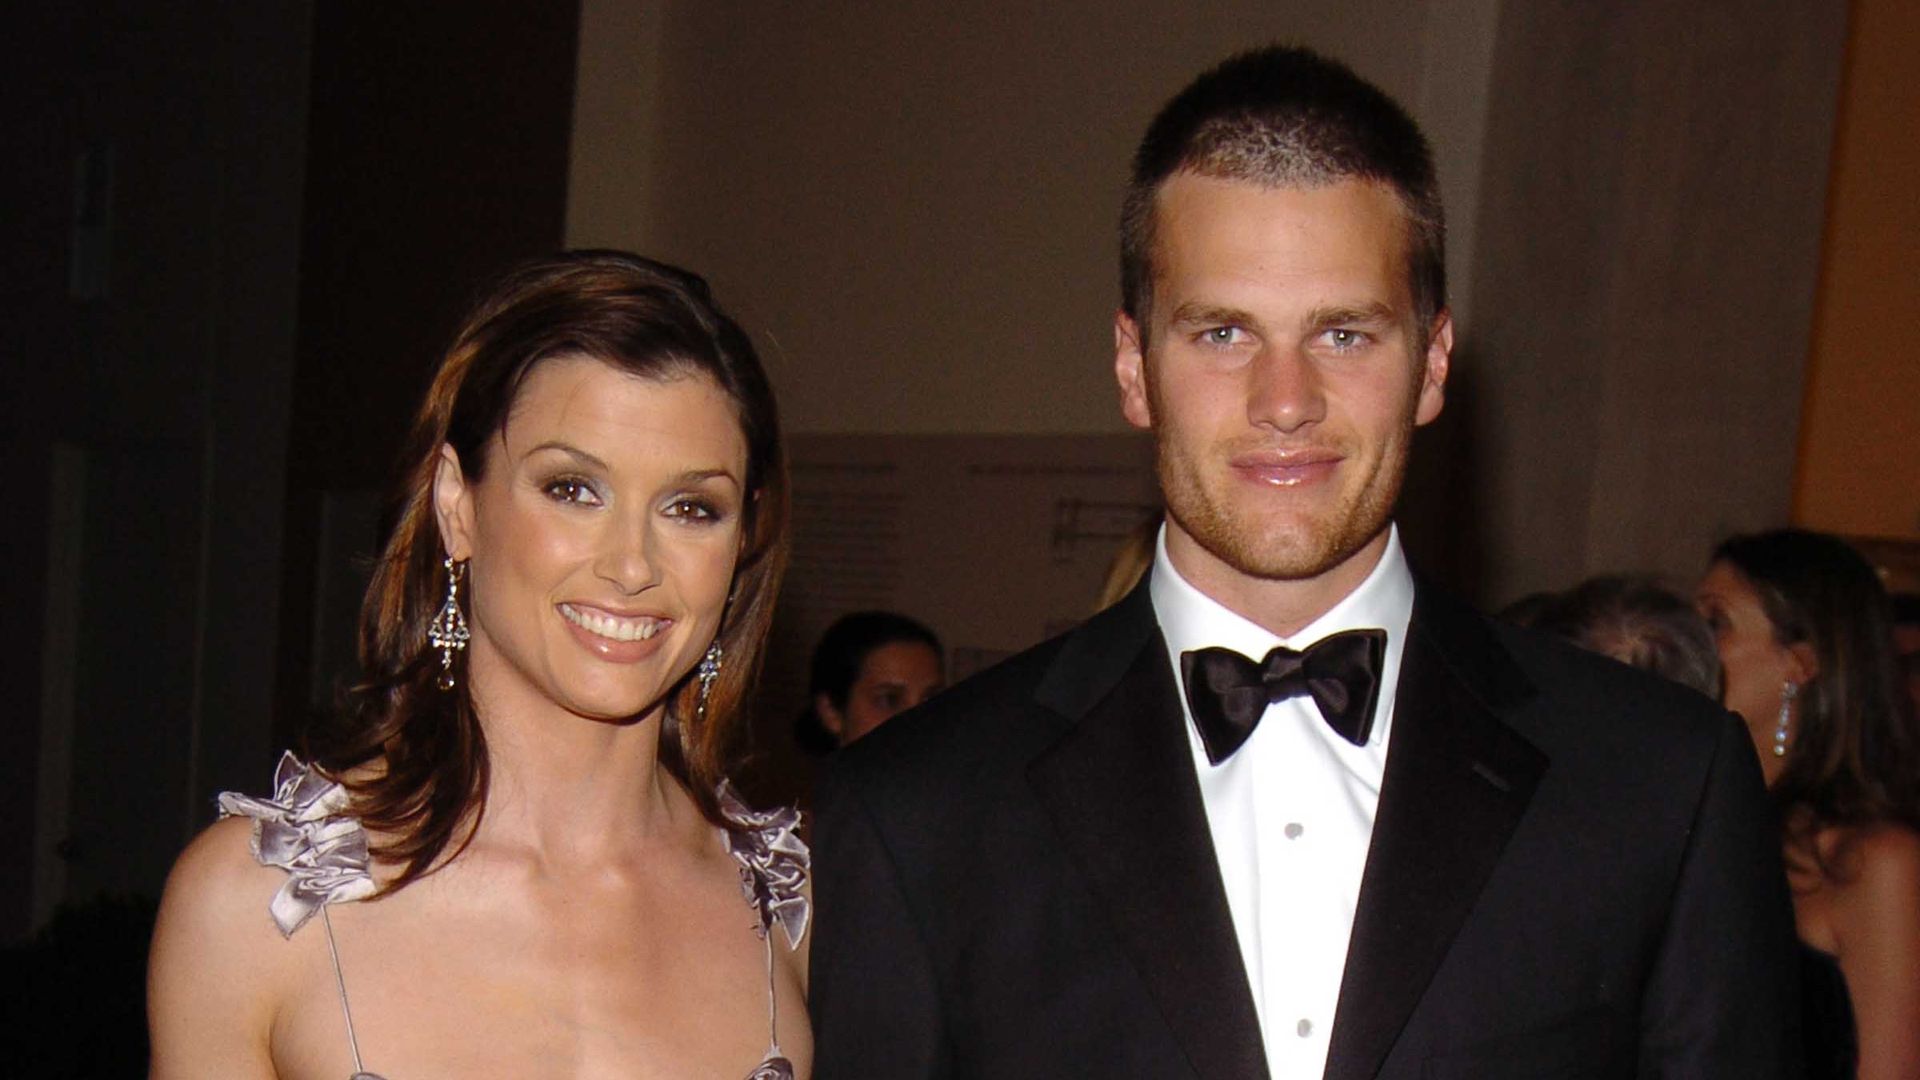 Bridget Moynahan shares cryptic message on loyalty after Tom Brady gets roasted for mid-pregnancy split: what happened